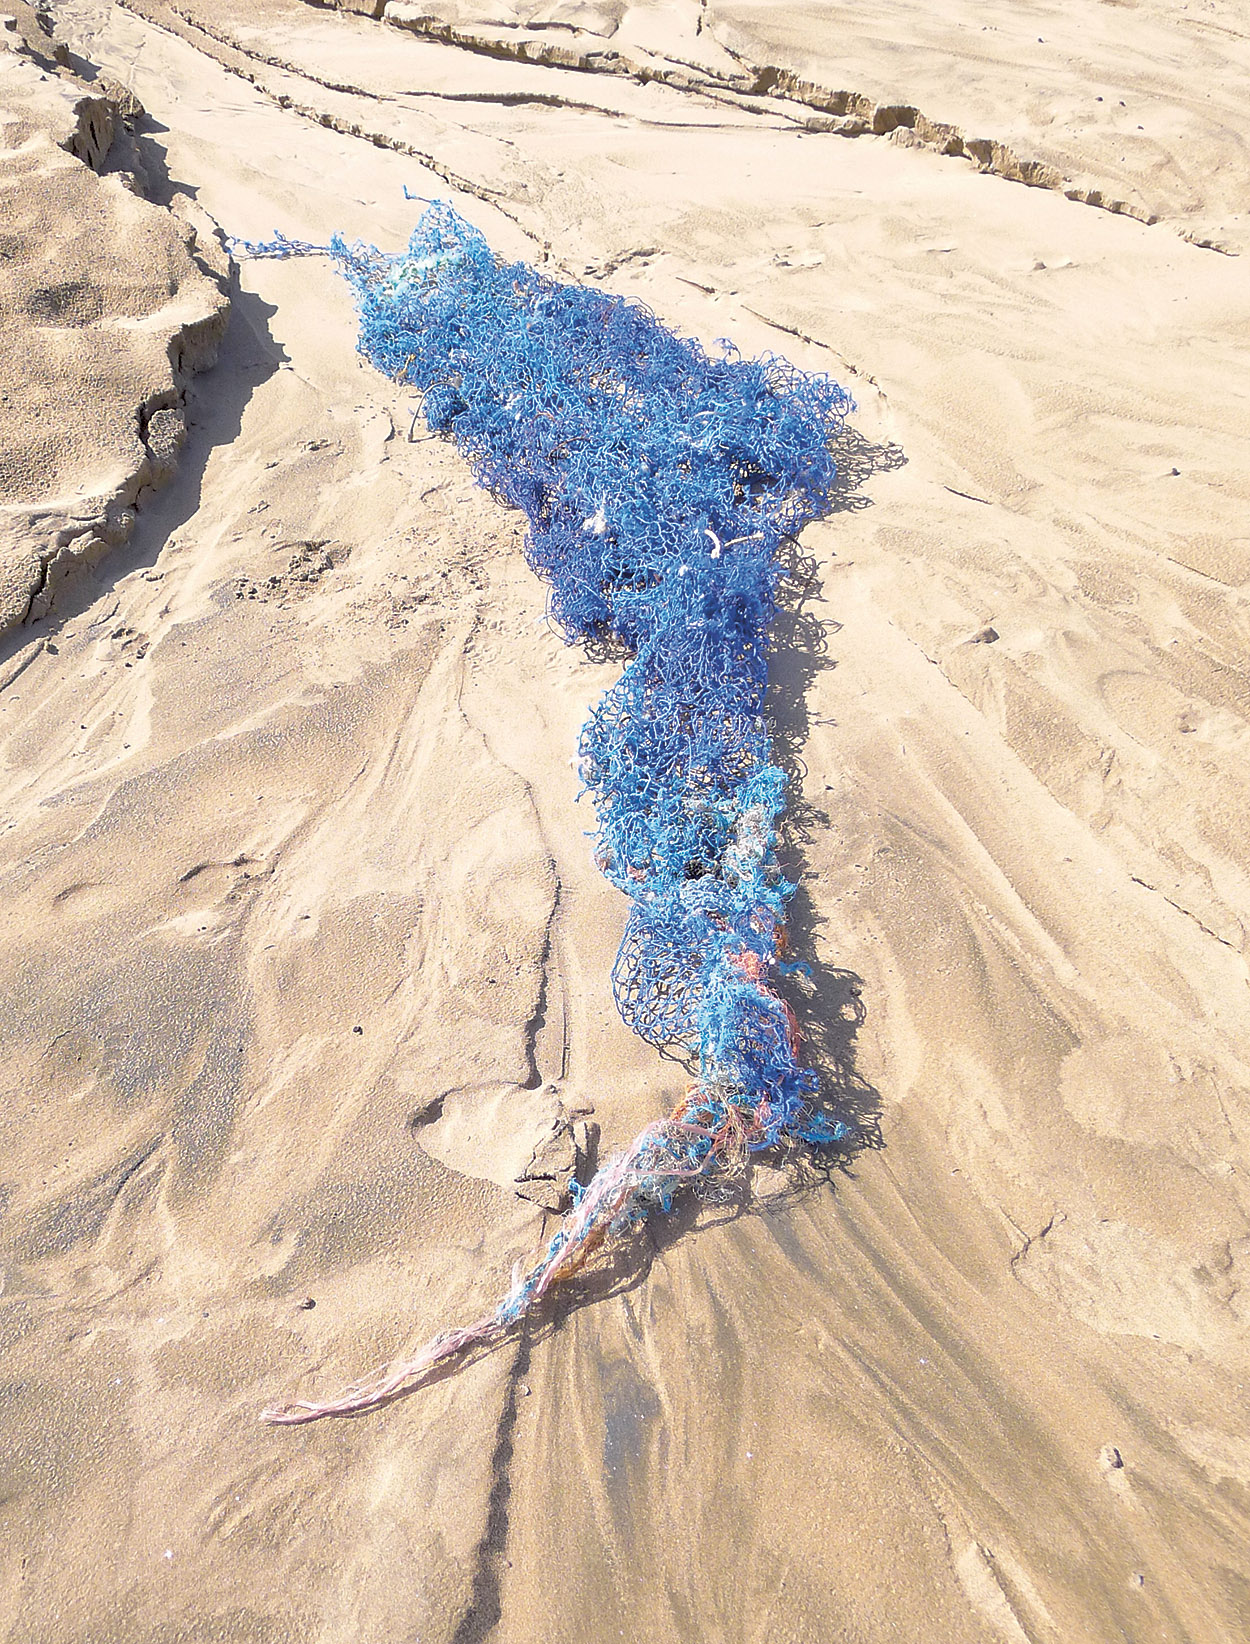    Mermaid, Left &amp; Found   Dozens of fishing nets found in the sand and knotted. 280 x 65 cm. 